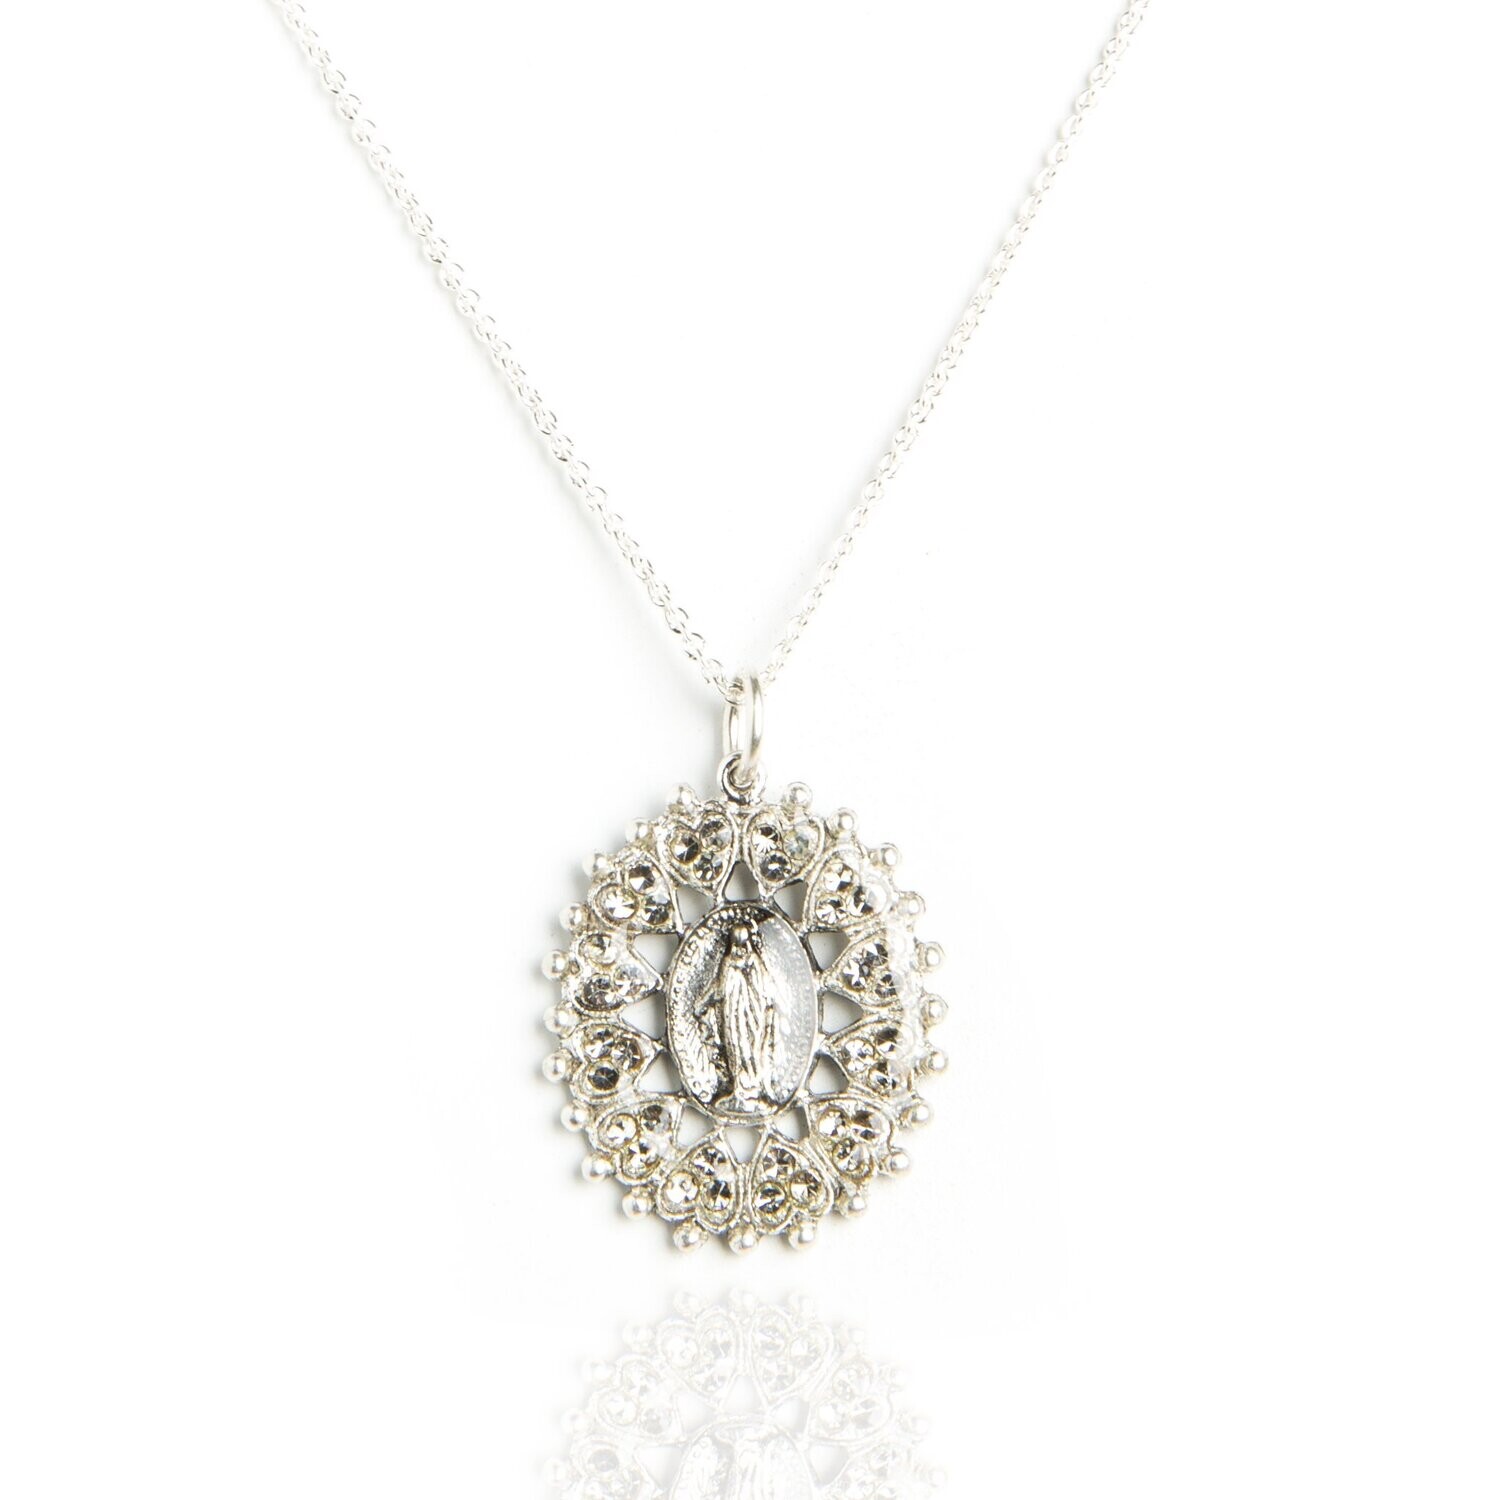 VSA Bringing Her Home Necklace, Silver